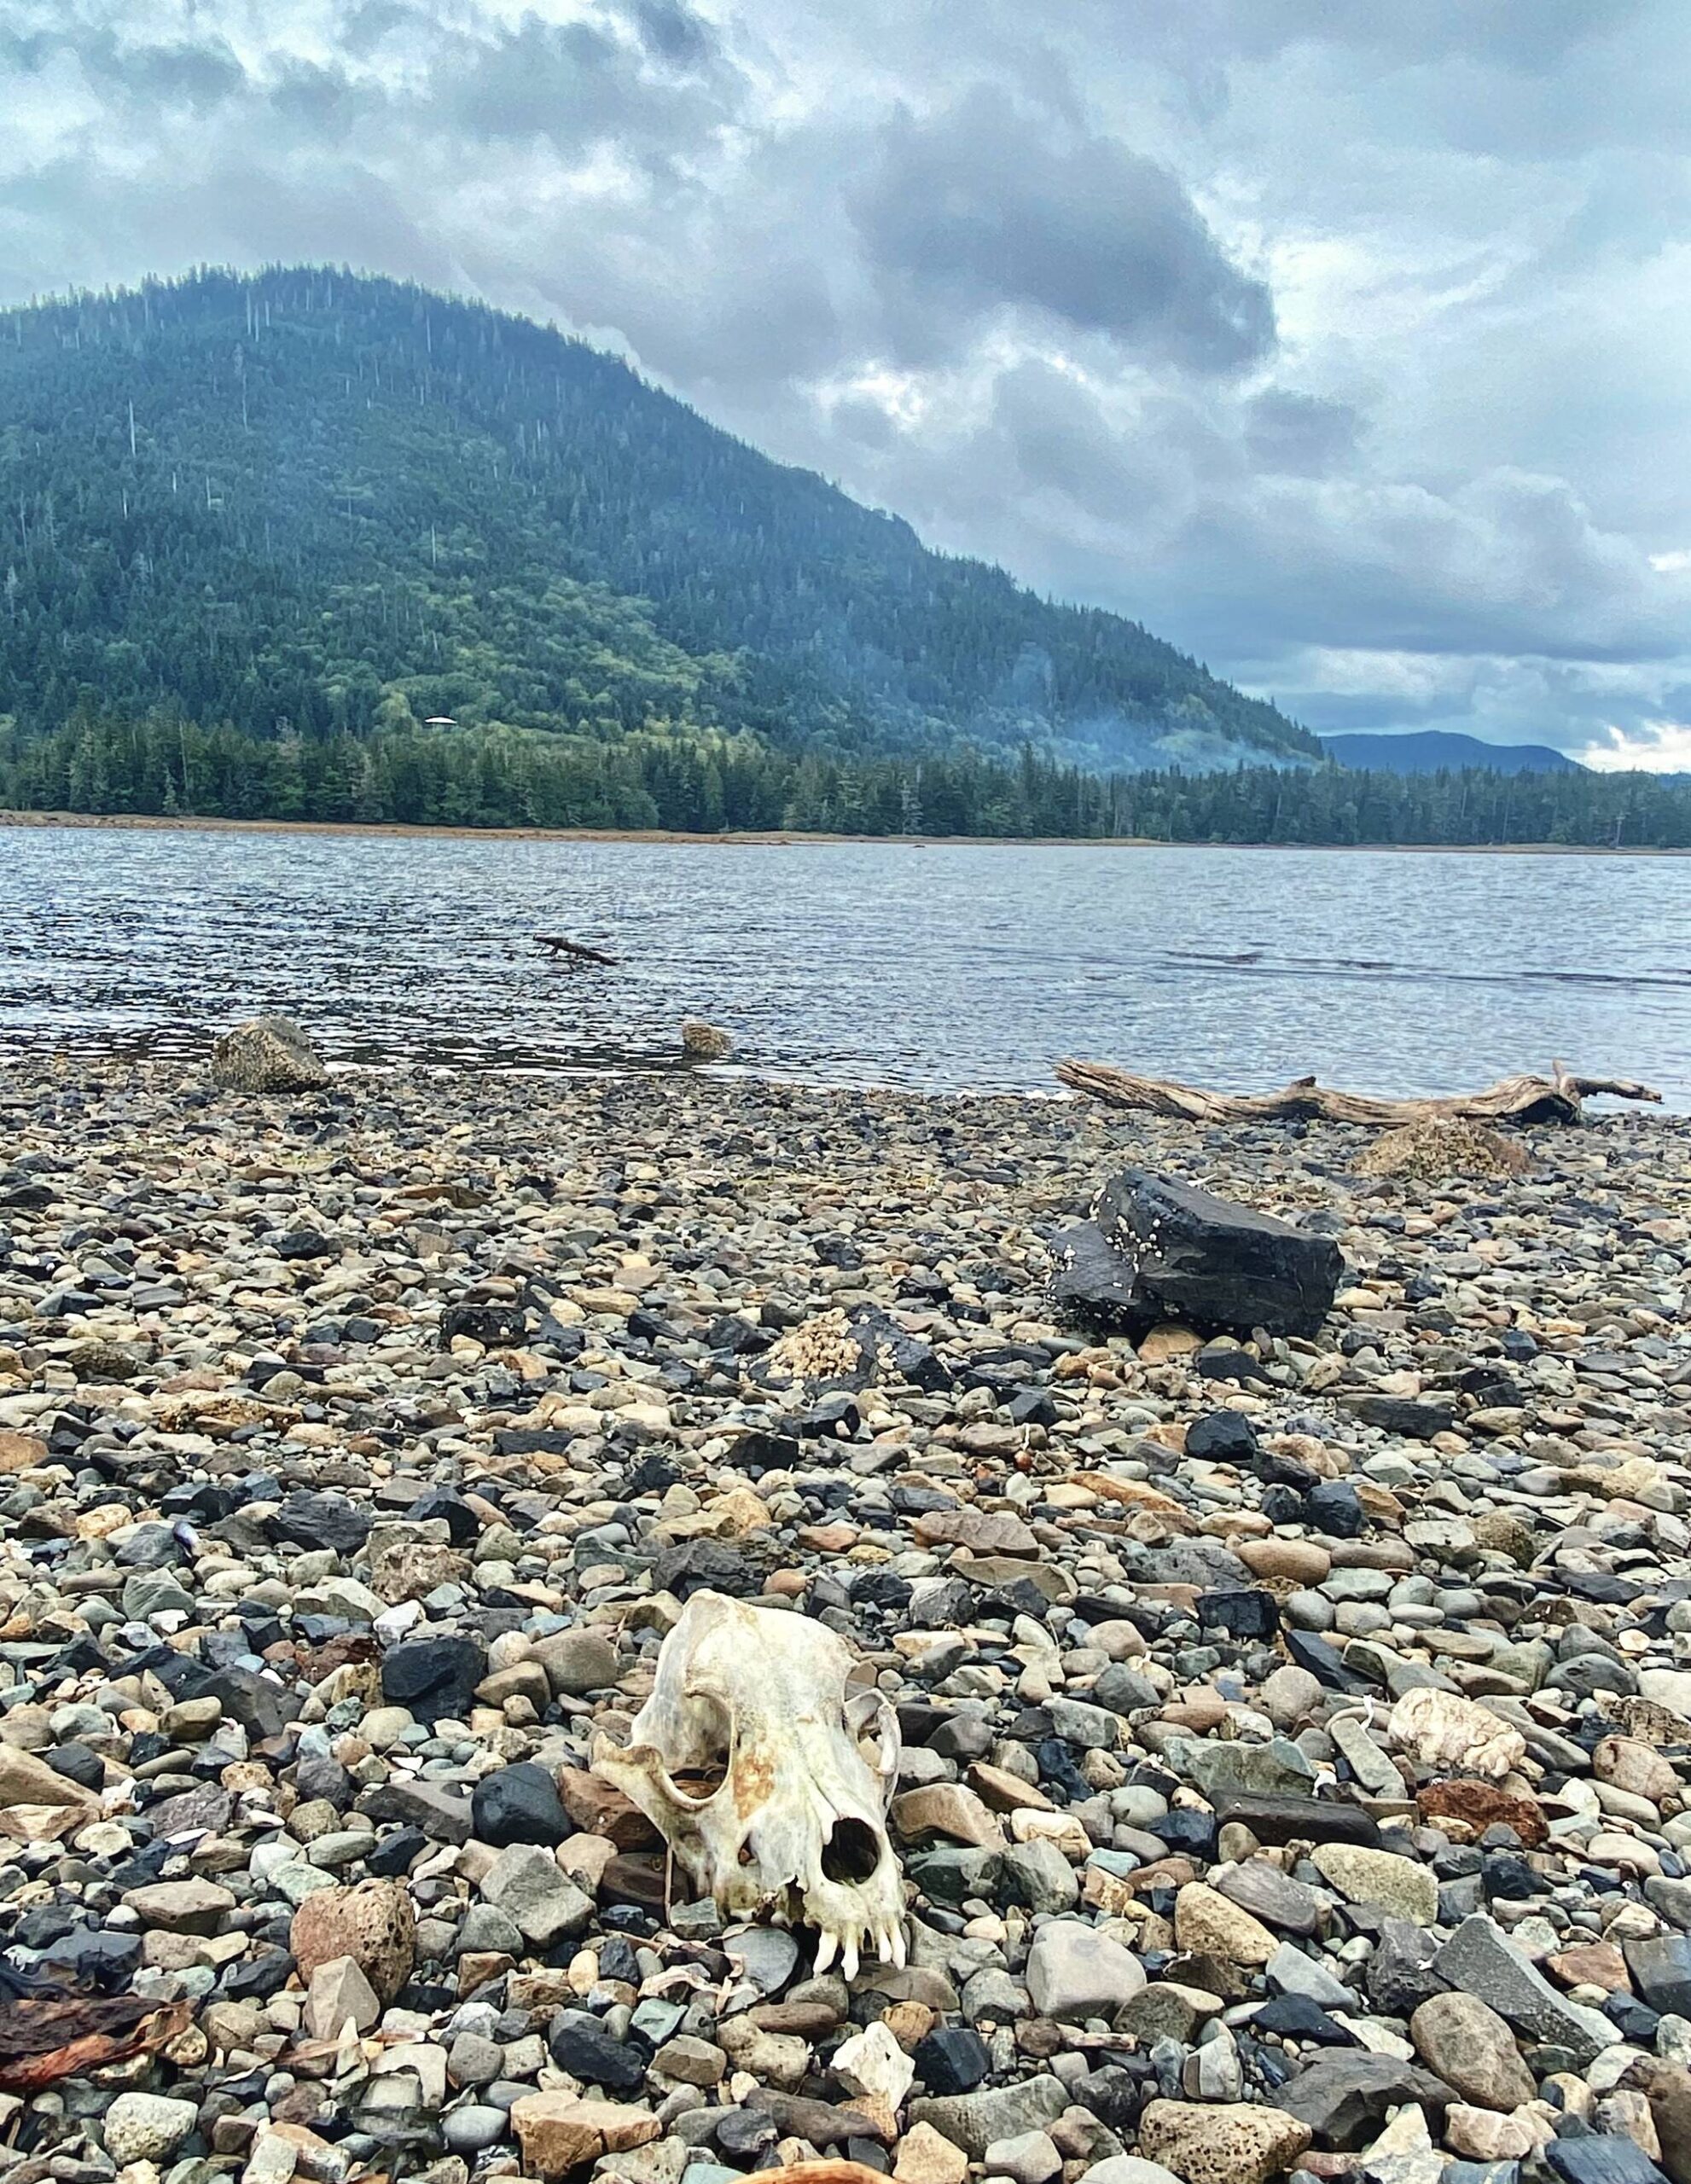 A washed-up skull on the beach in Craig on Sept. 8. (Photo by Marti Crutcher)